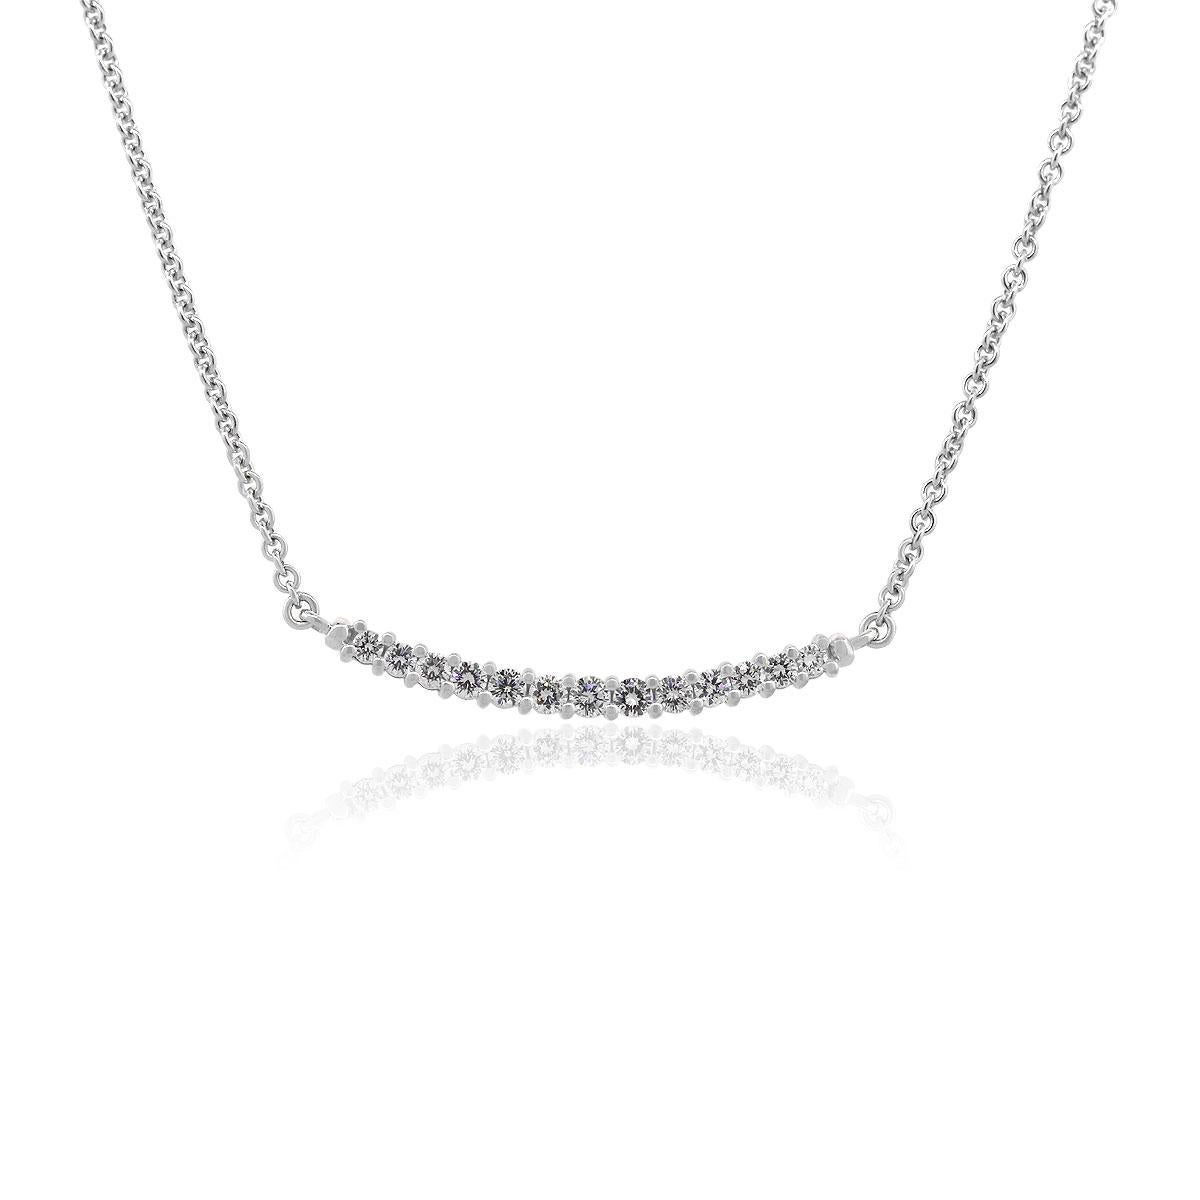 Material: 18k White Gold
Diamond Details: Approx. 1ctw of round brilliant diamonds. Diamonds are G/H in color and VS in clarity.
Necklace Measurements: 16″ in length
Pendant Measurements: Approx. 1.5″ x 0.13″ x 0.13″
Fastening: Lobster clasp
Item